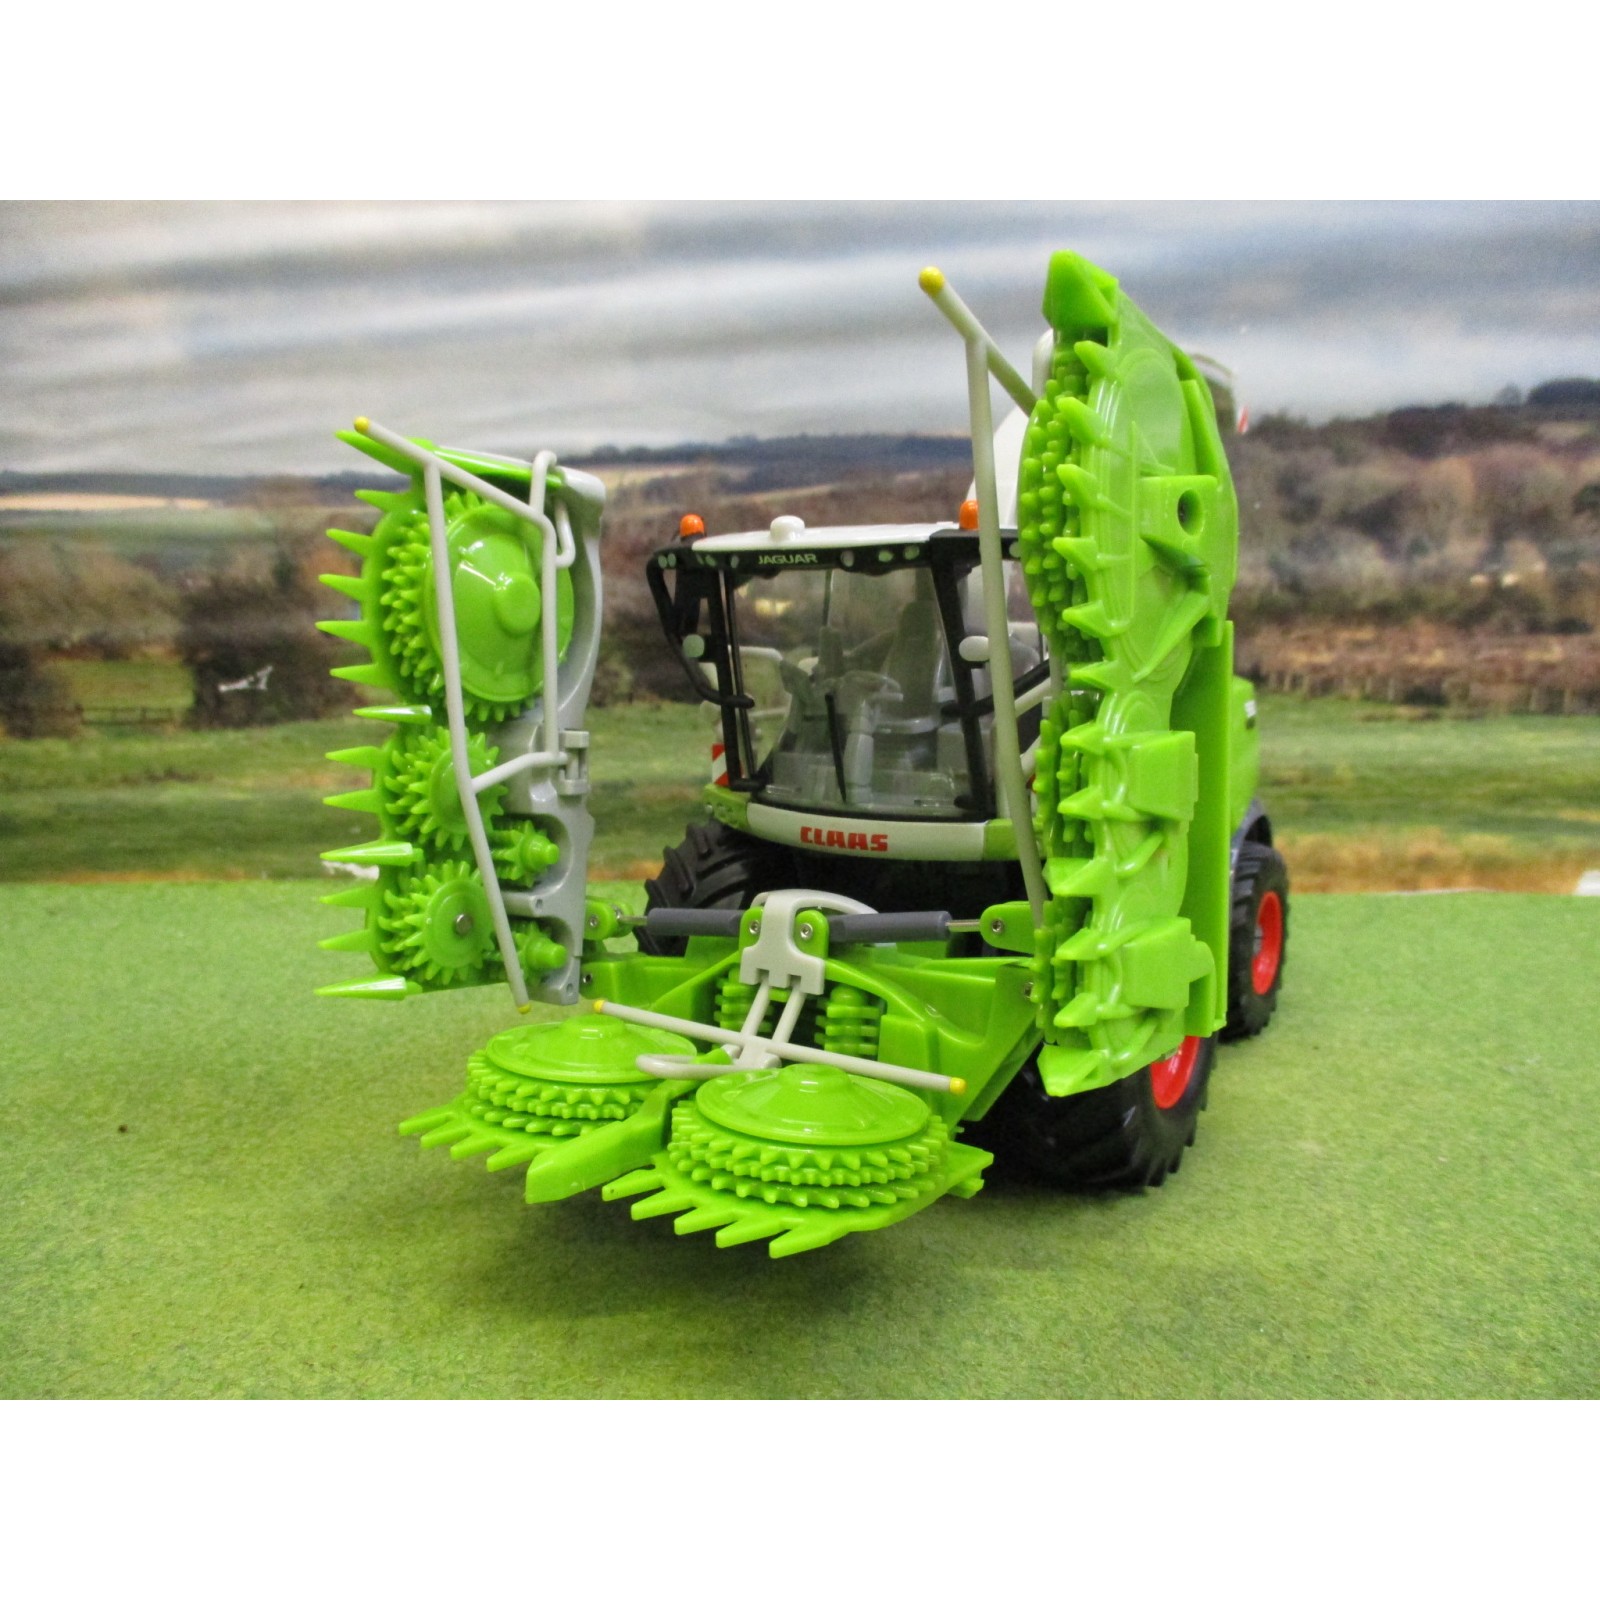 REPRODUCTION BRITAINS 1:32 CLAAS FORAGER FRONT GUIDE 